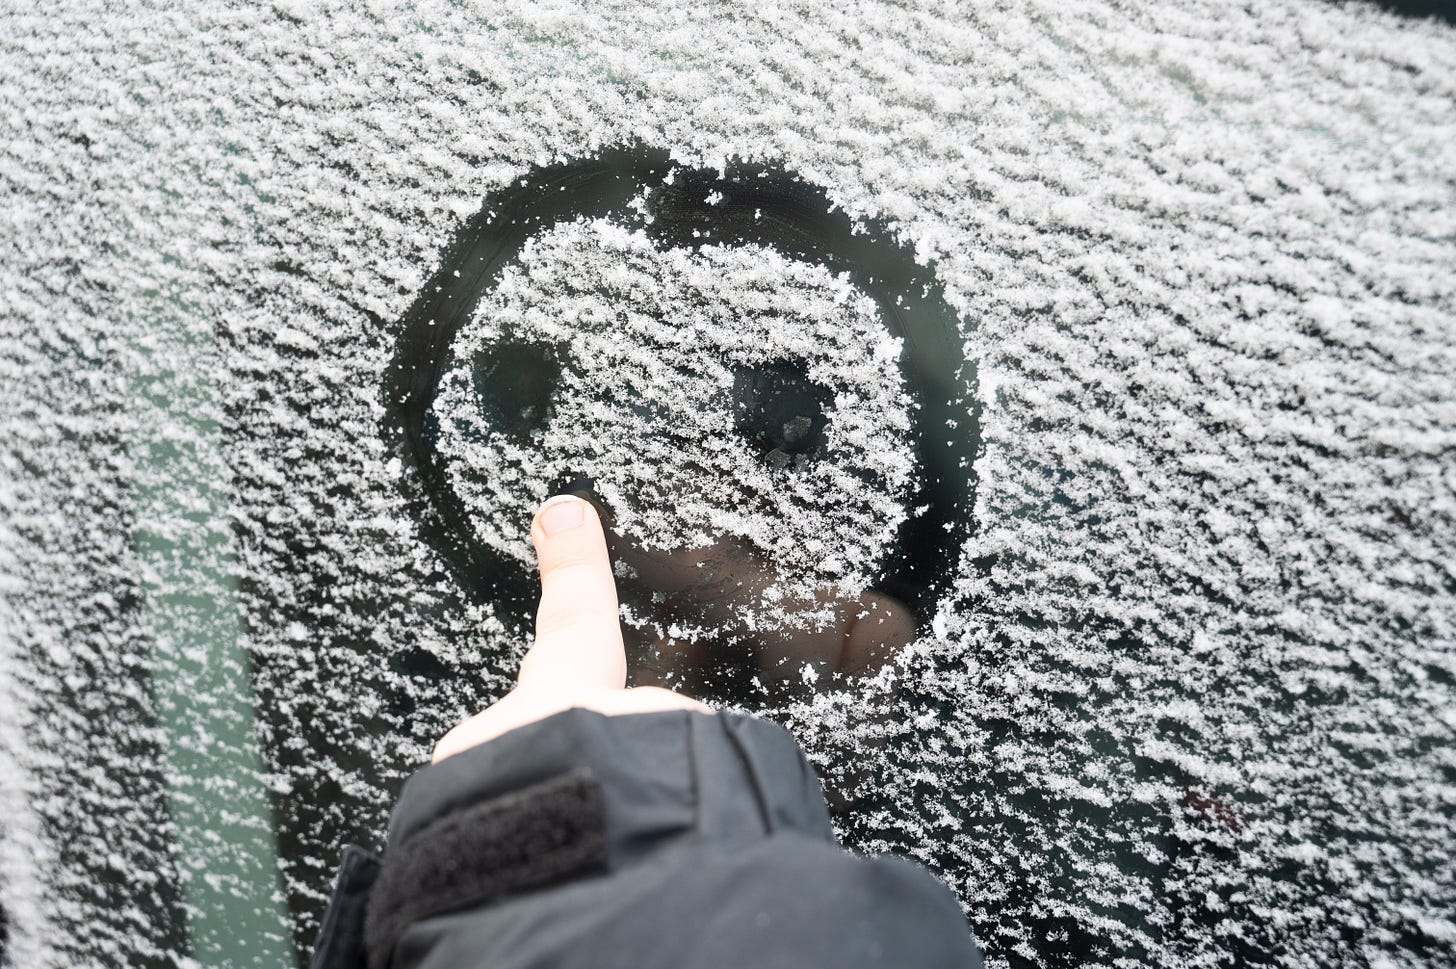 A middle finger poking out of a black coat sleeve drawing a smiley face on a snowy window